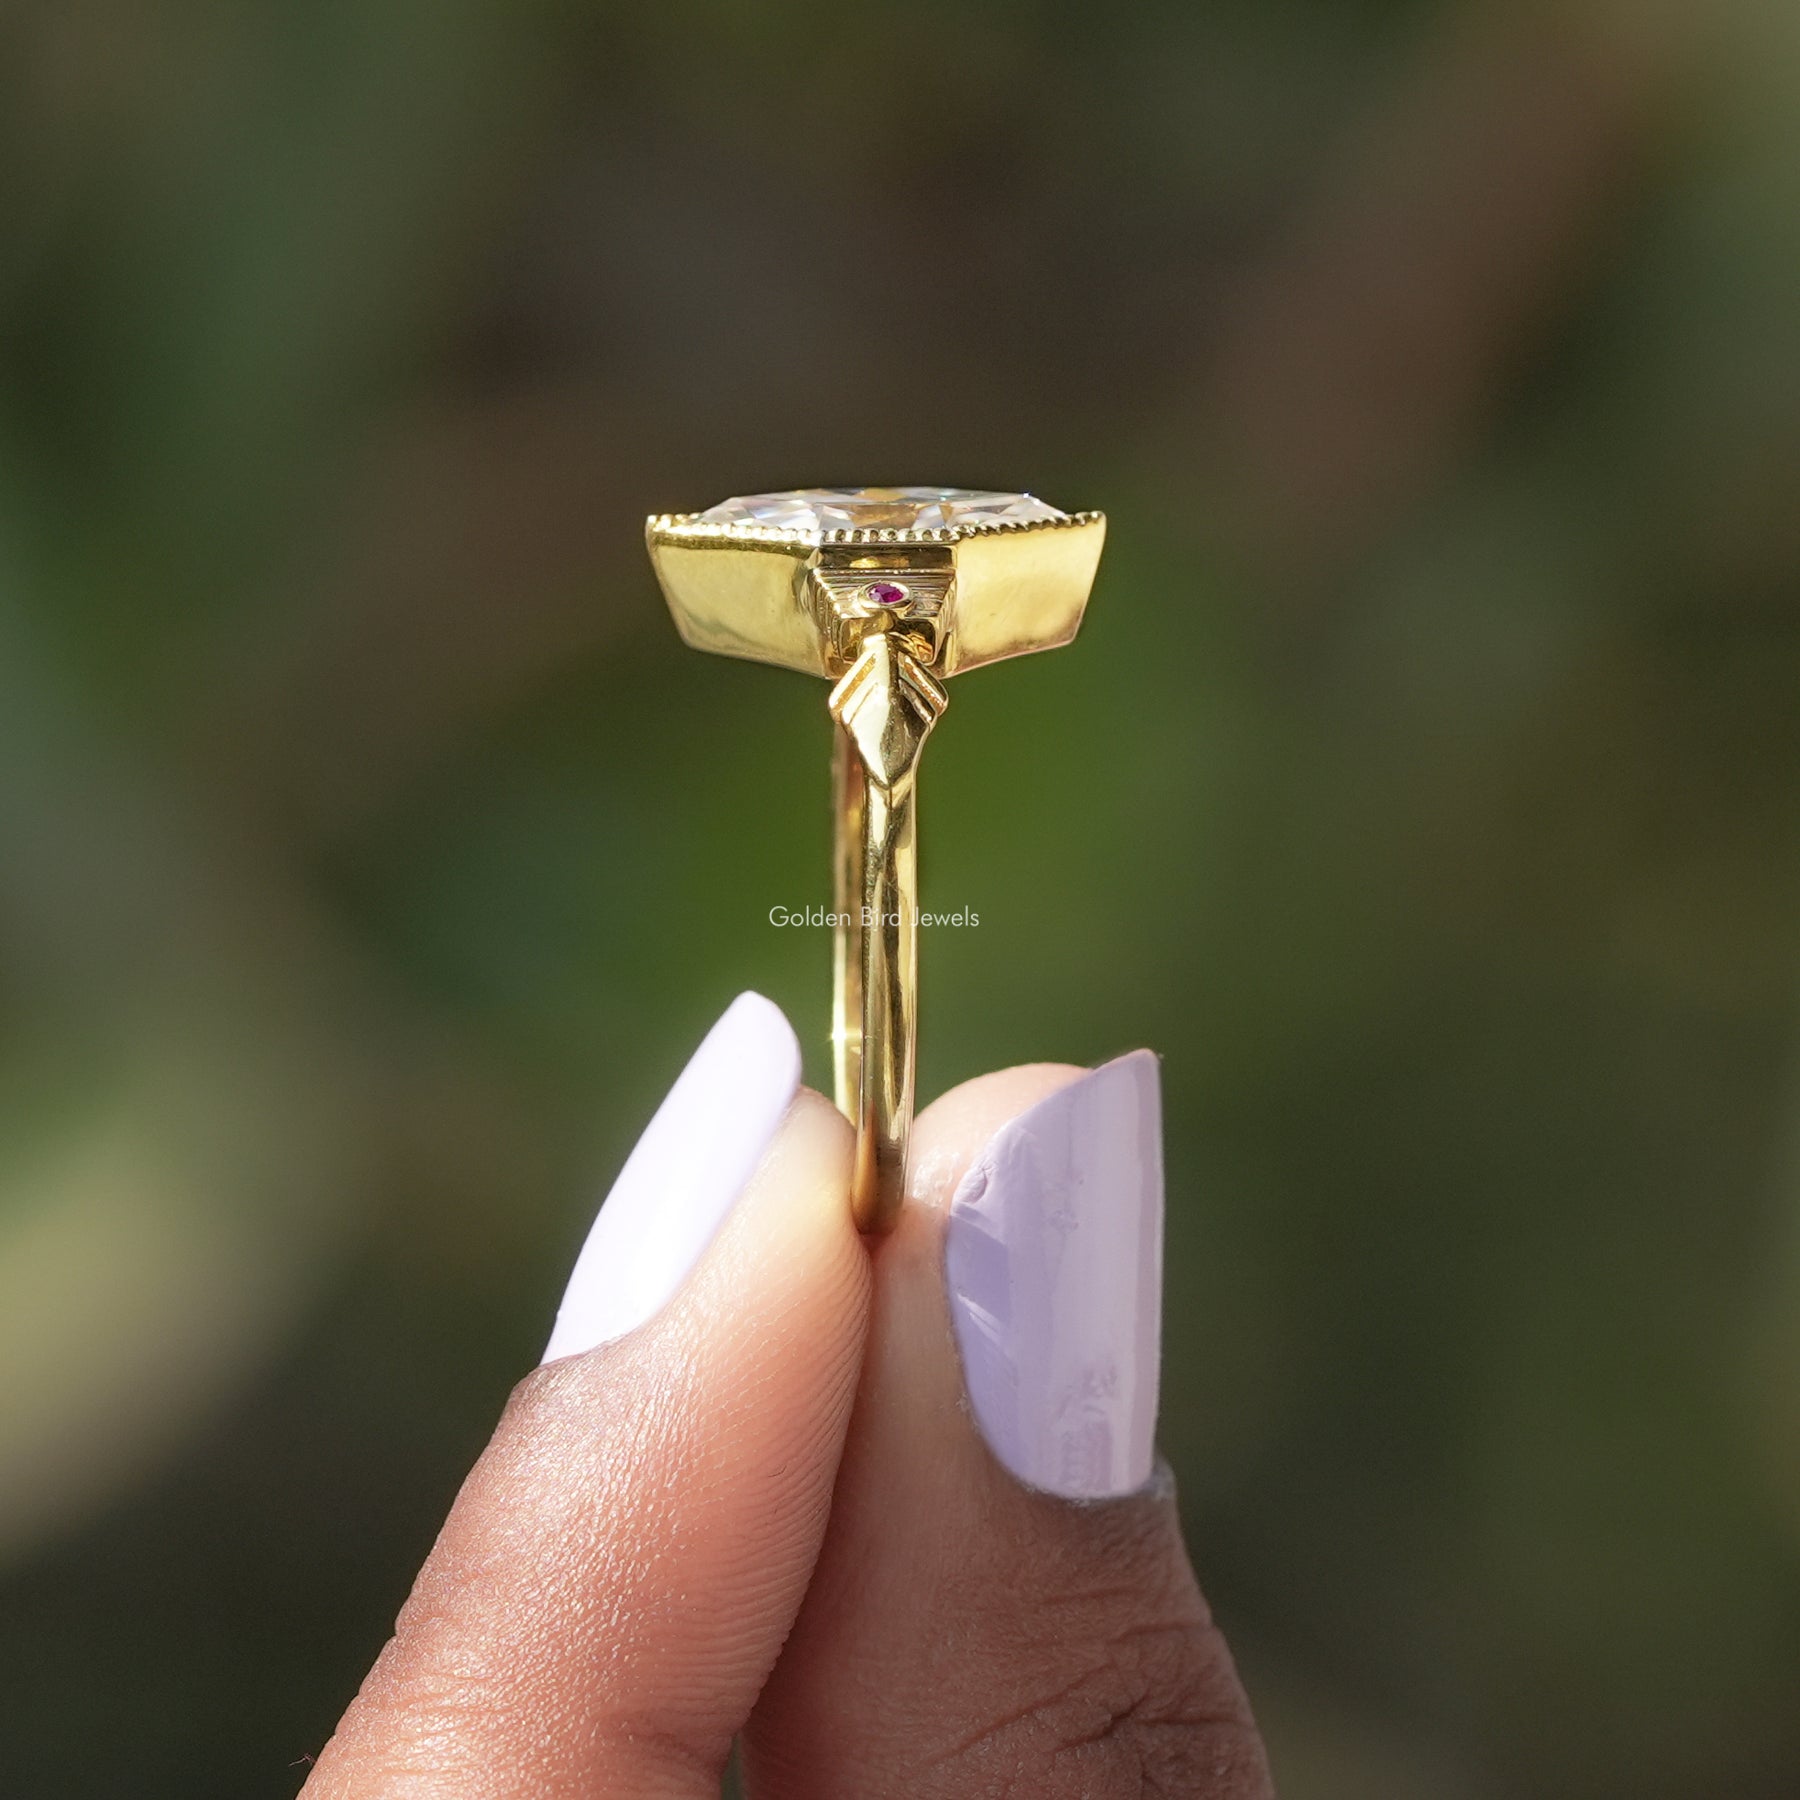 [Side view of dutch marquise cut moissanite ring crafted with 14k yellow gold]-[Golden Bird Jewels]